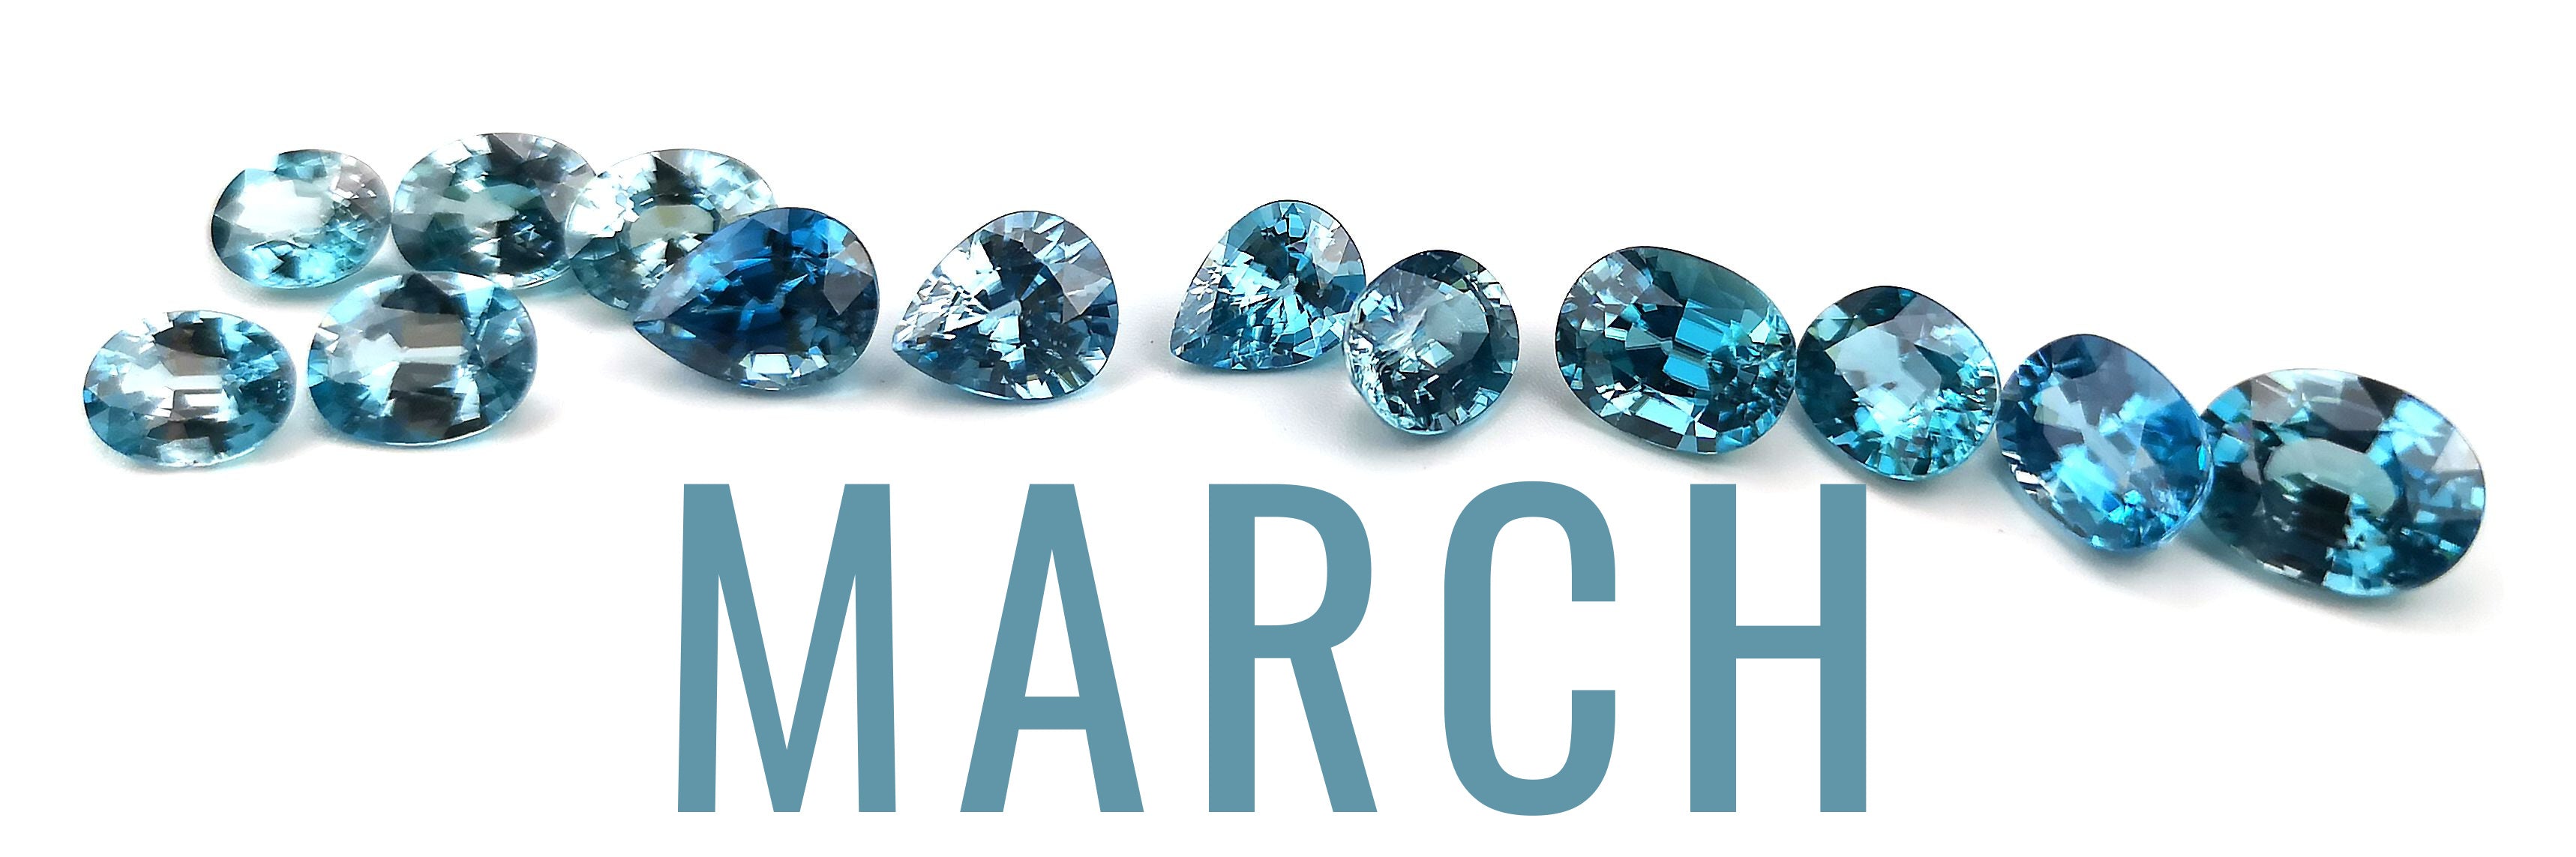 Tranquil Aquamarine: A Silver Jewellery Collection Featuring March Birthstone Crystals from Austria